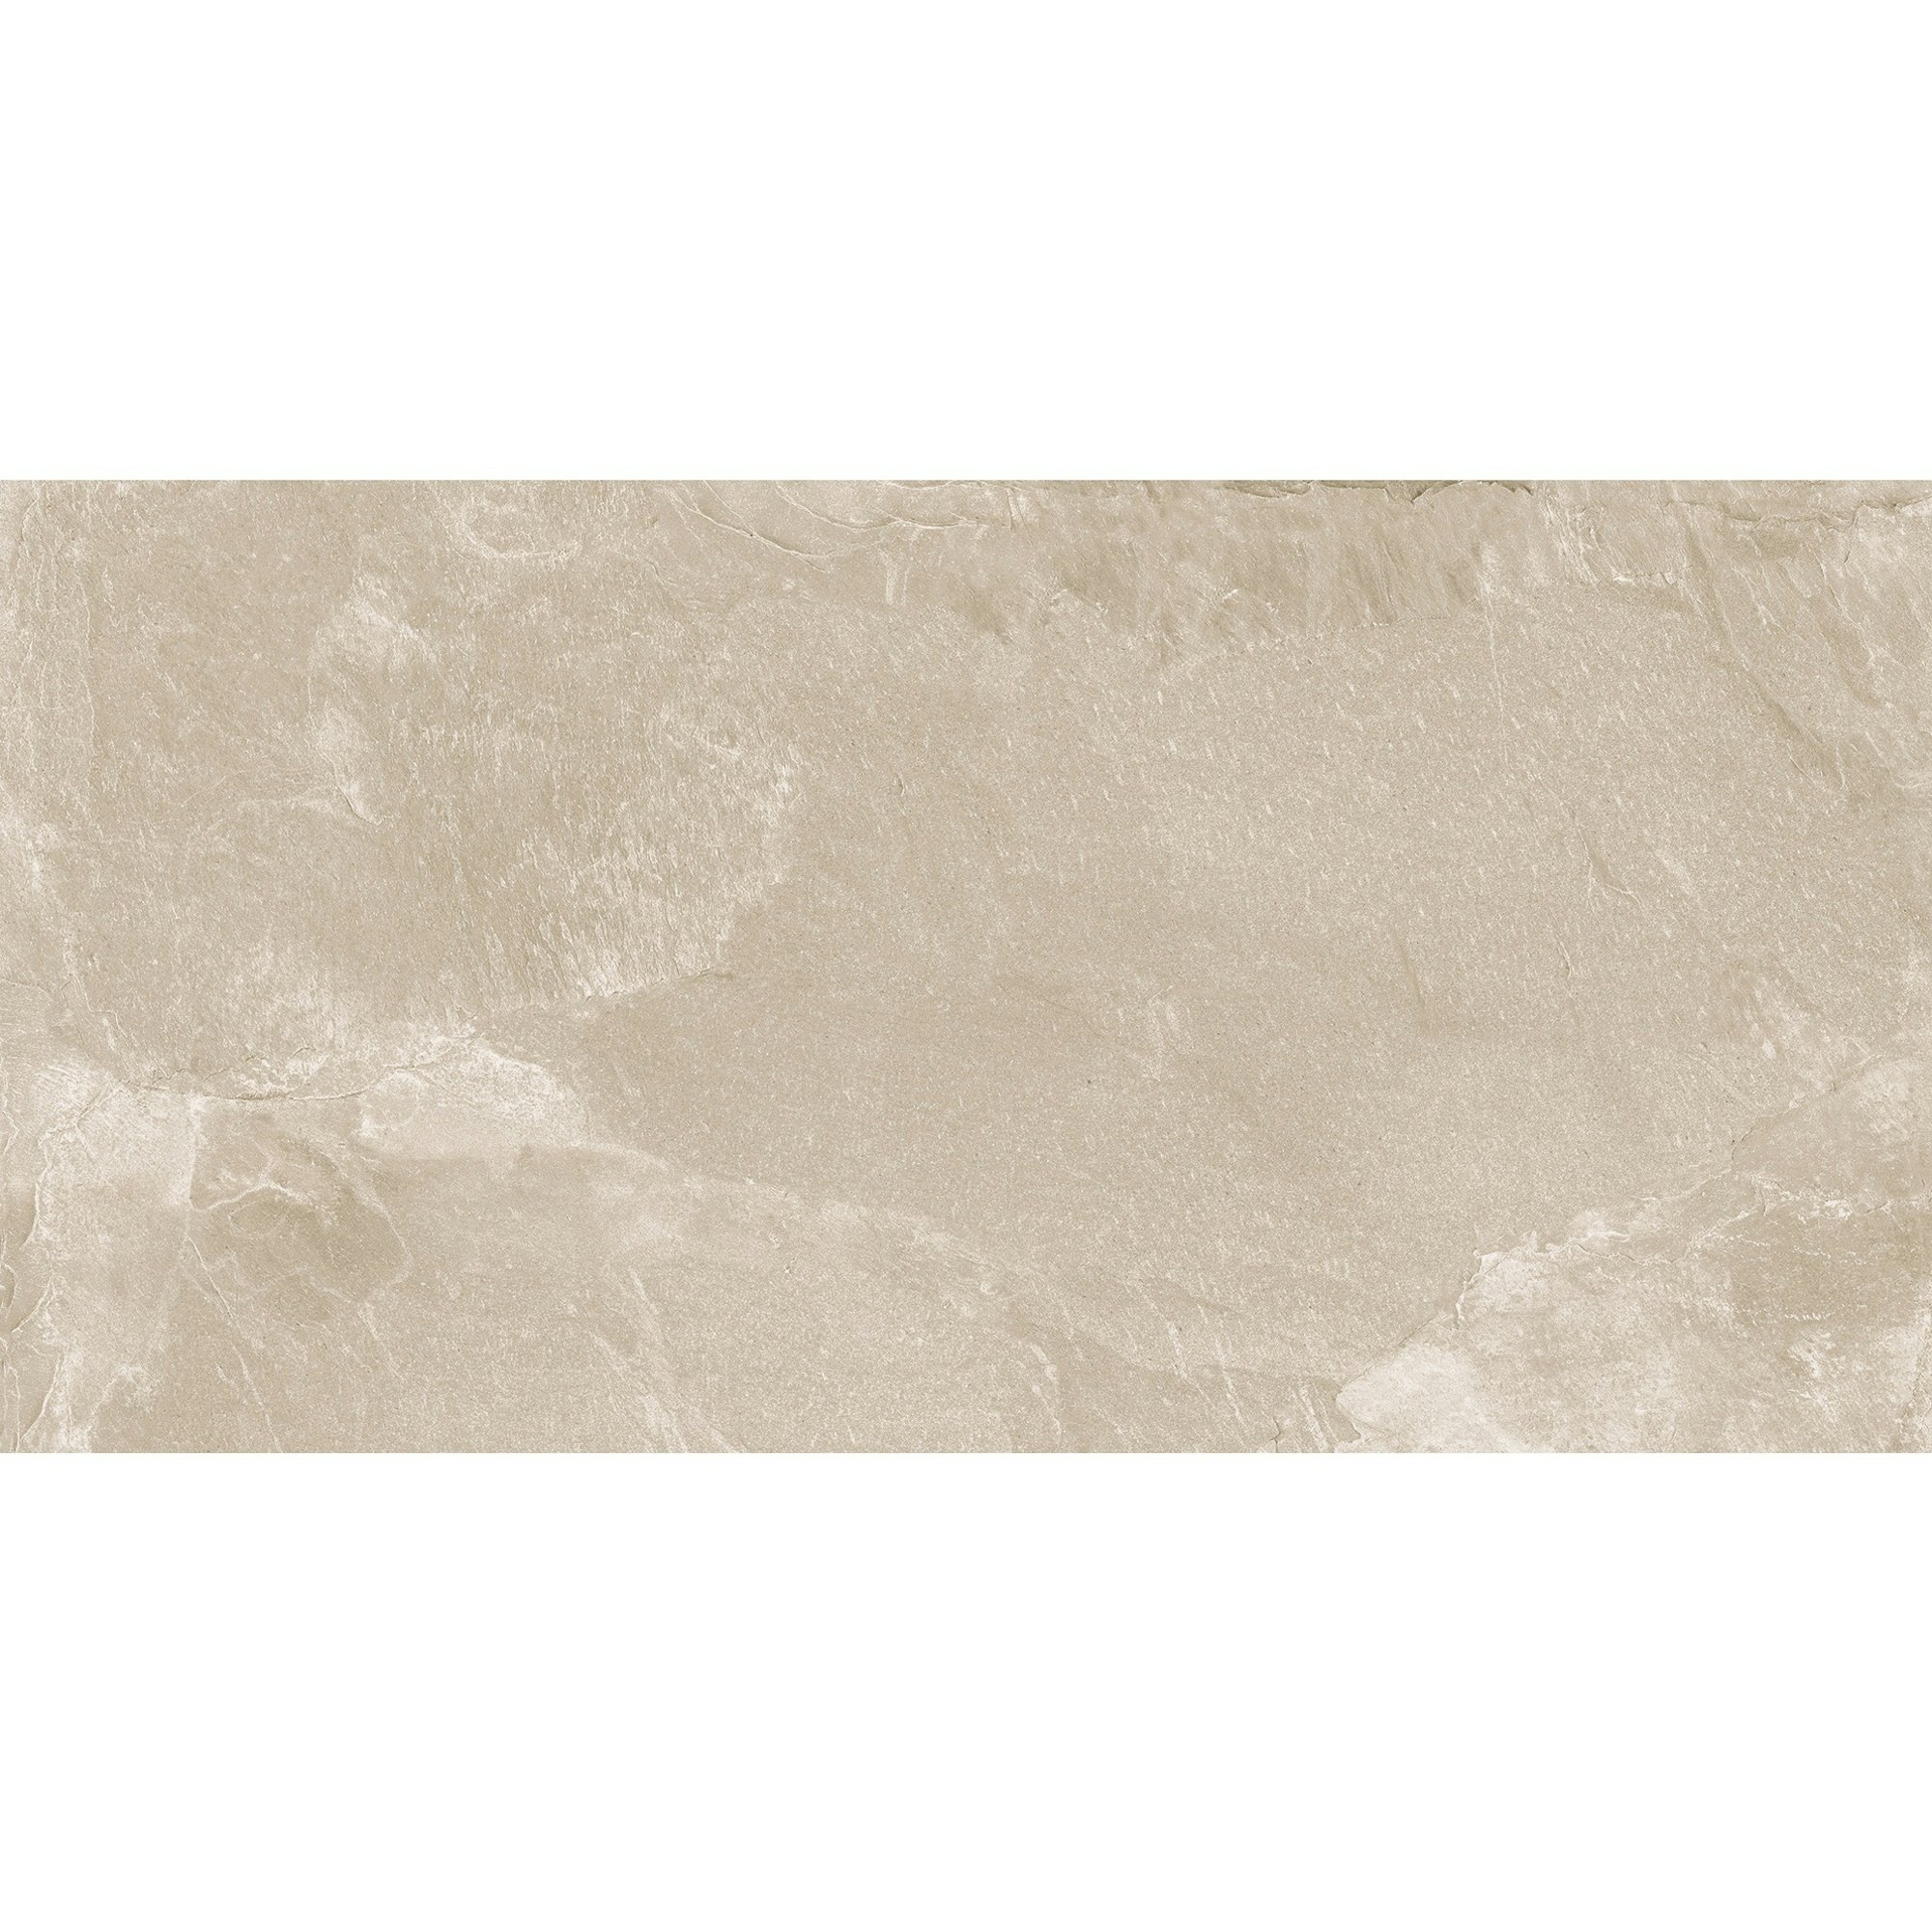 Monumental Ivory 1200x600x20mm Outdoor Tile